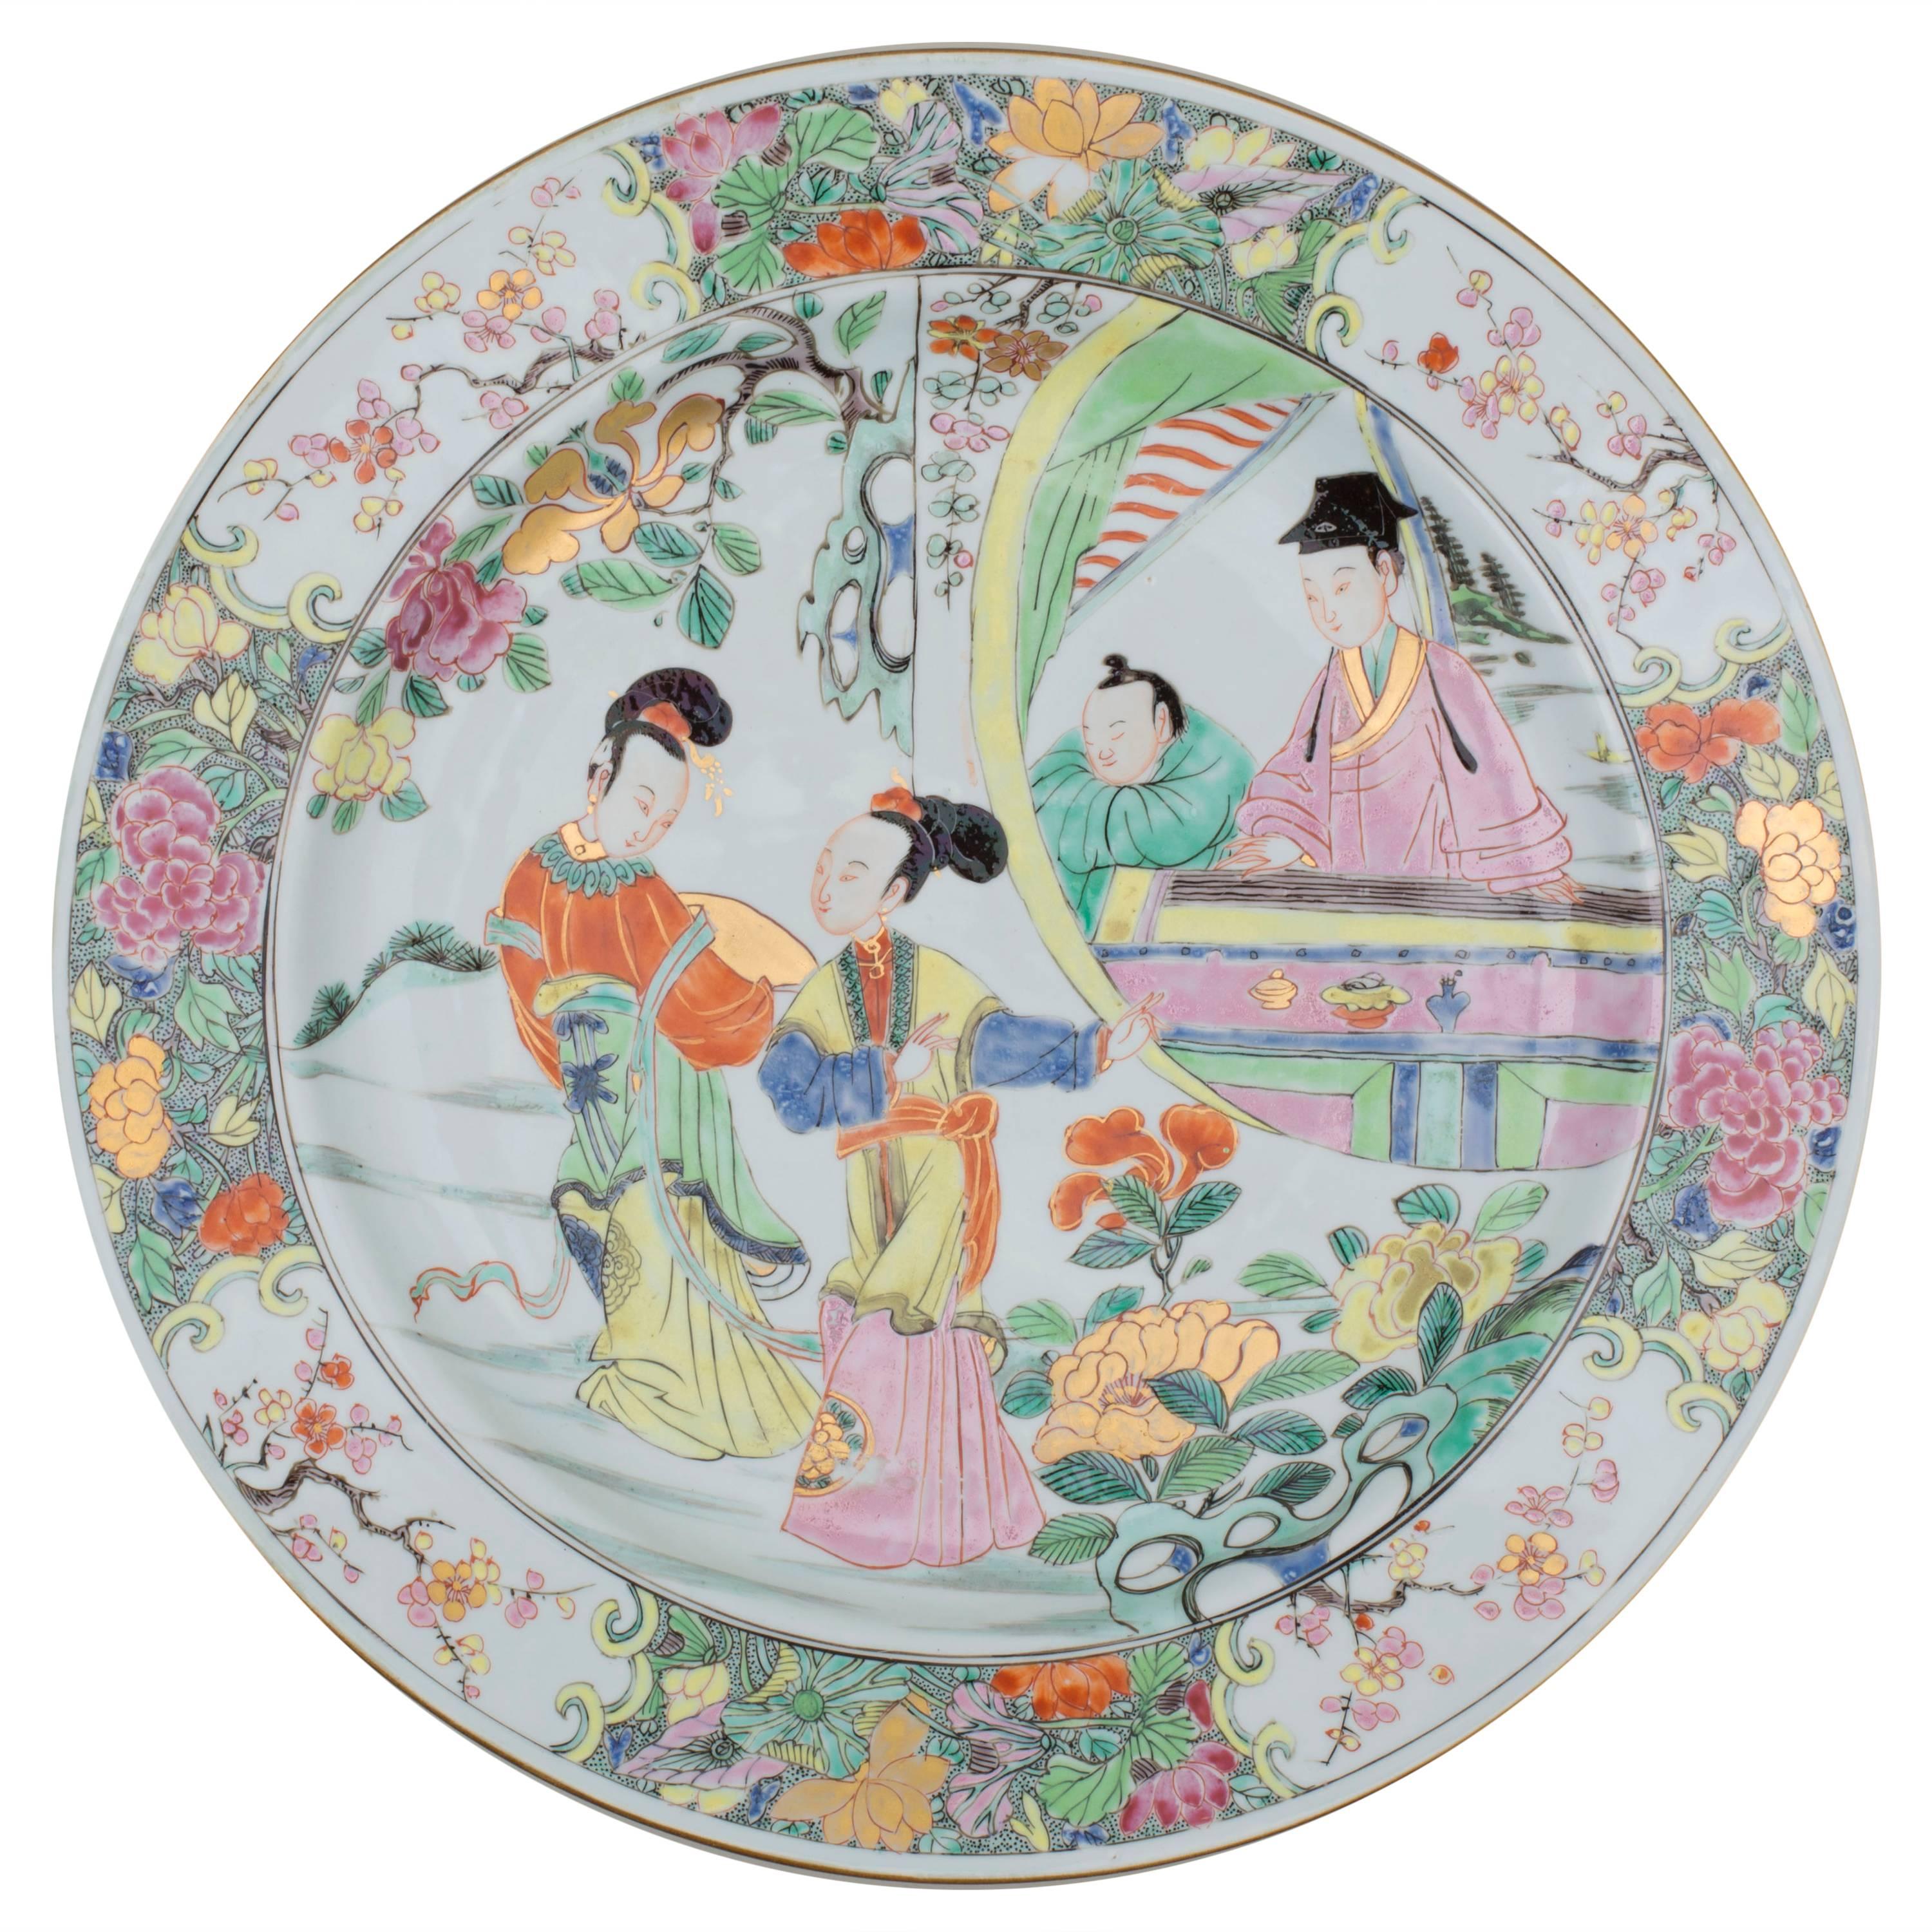 Chinese export porcelain famille rose dish, ladies dancing, early 18th century